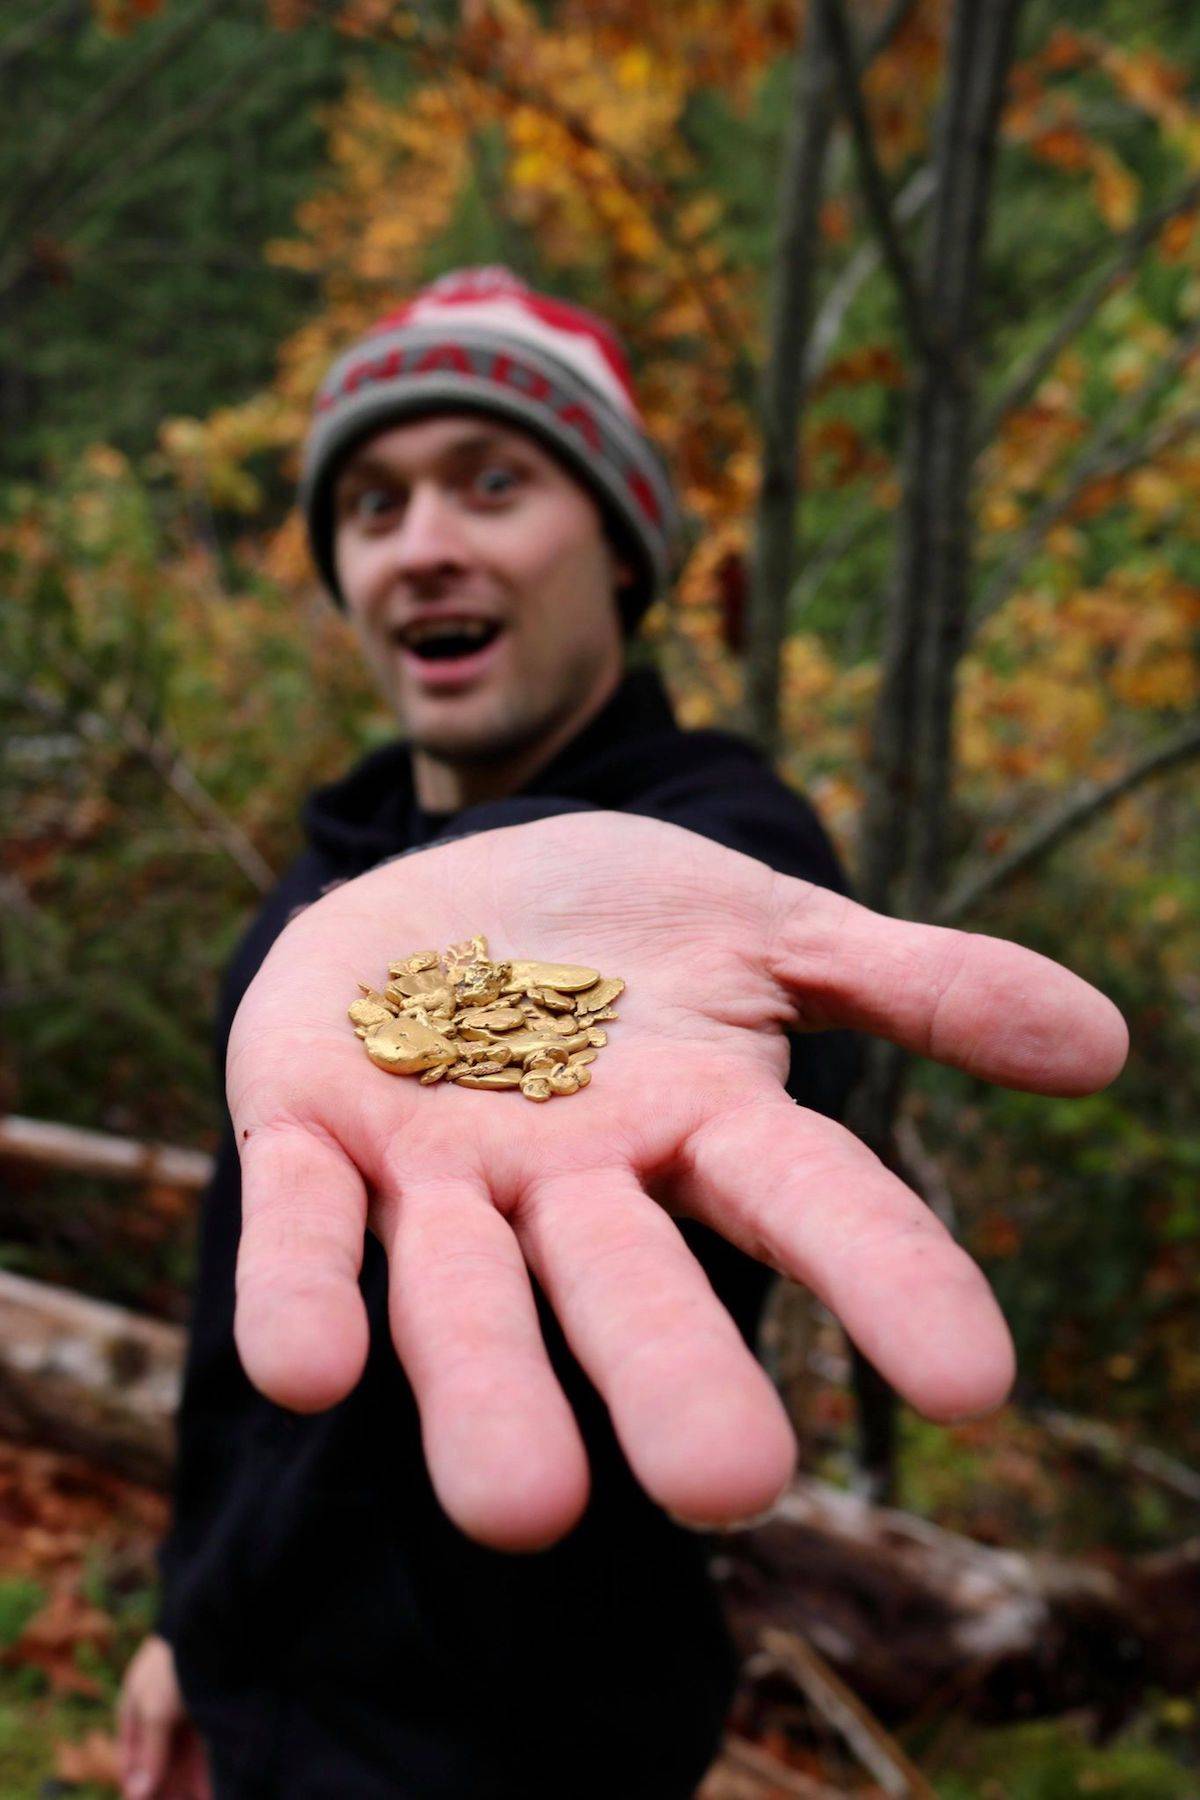 Hitting the jackpot: Sooke man finds niche audience by gold-panning on   - Greater Victoria News